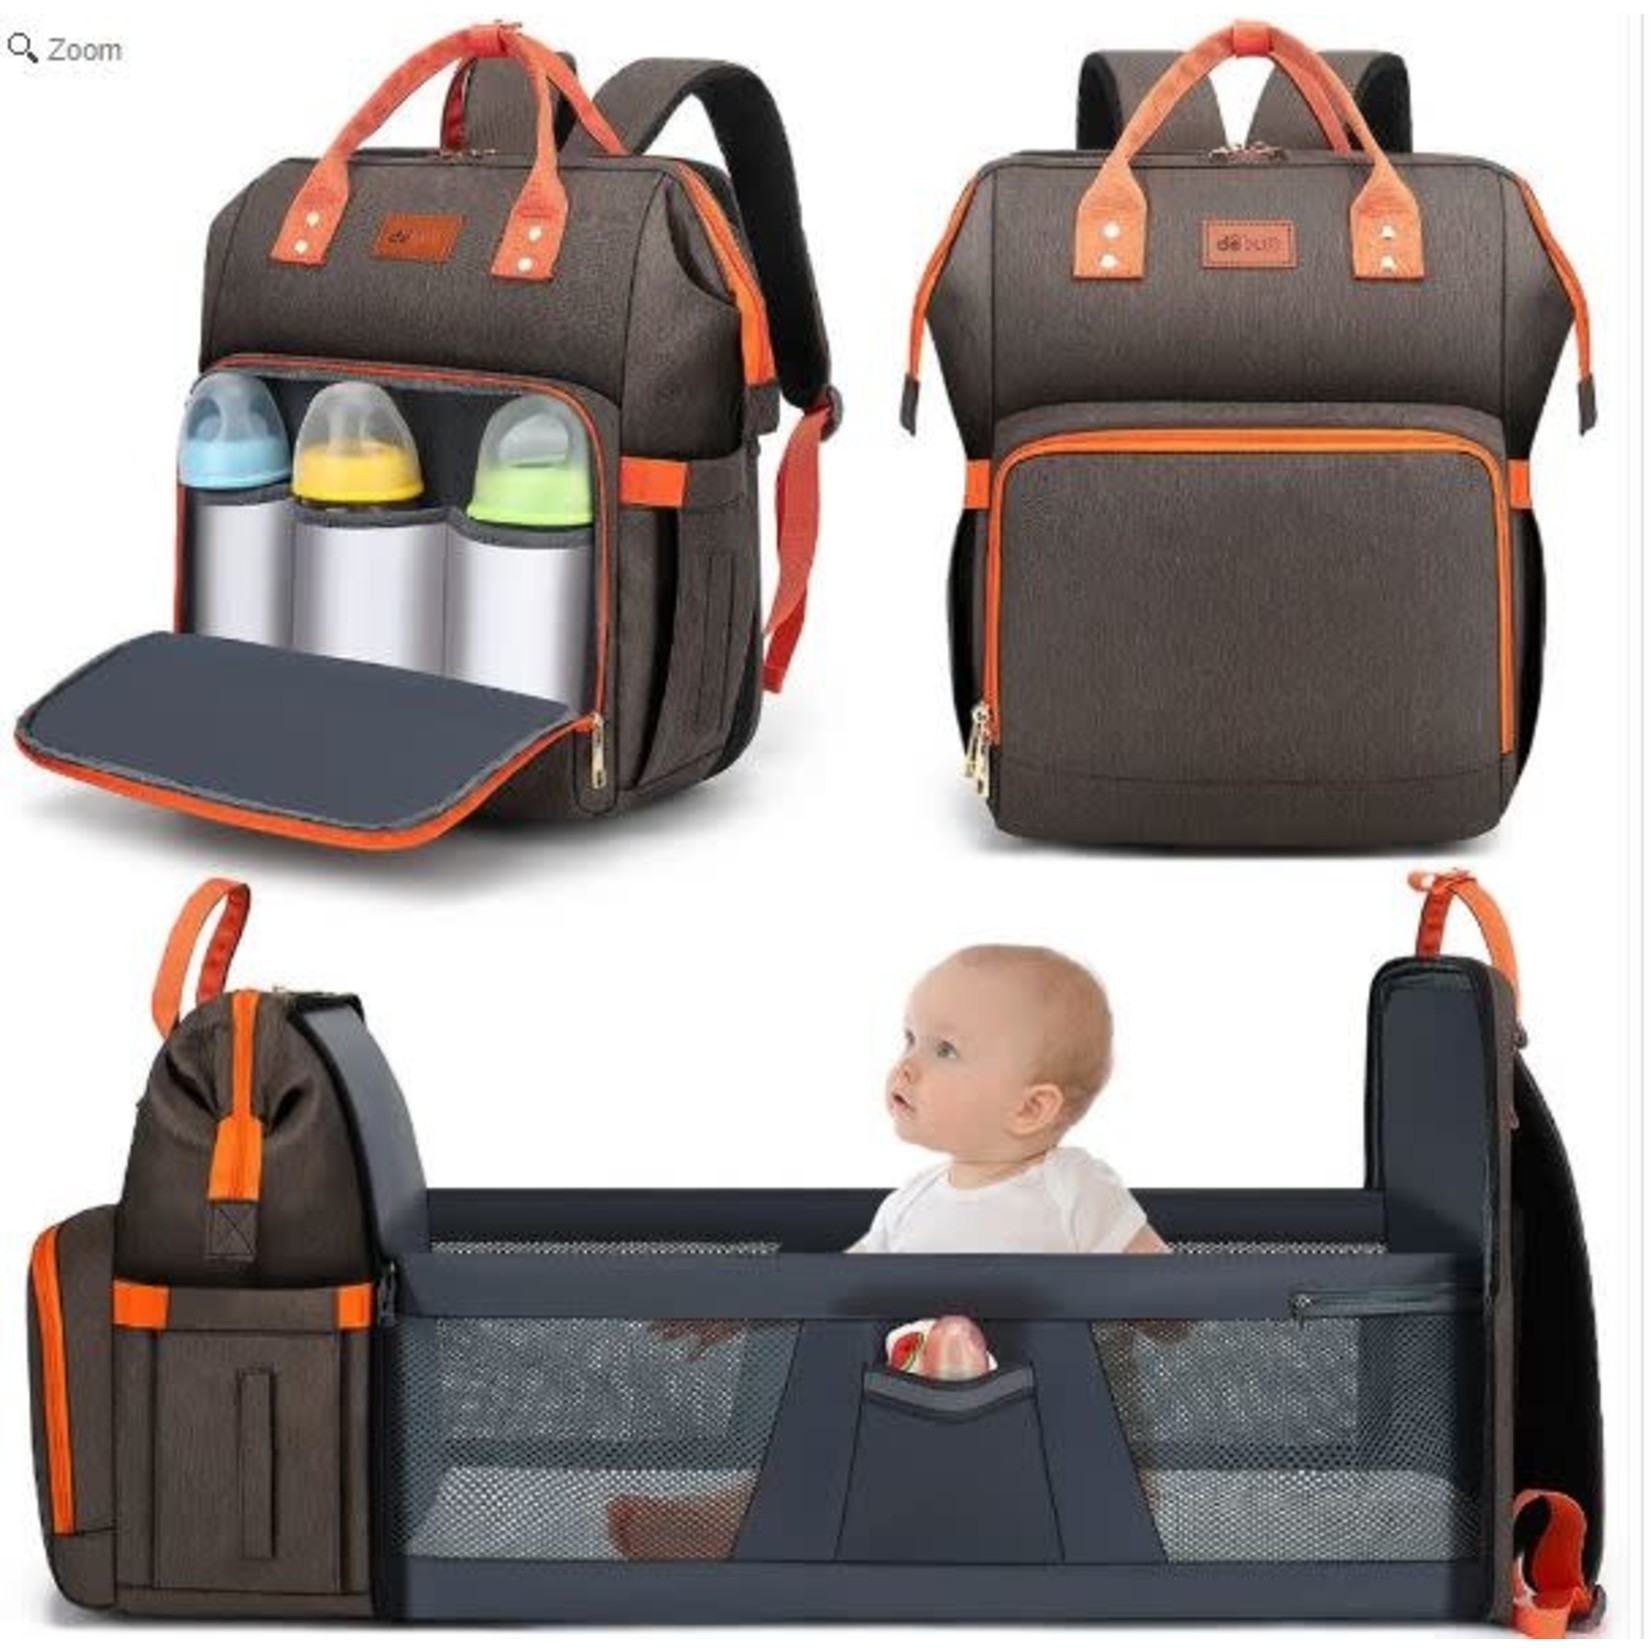 Bella Betty Baby Diaper Bag Backpack with Changing Station - Grey/Orange